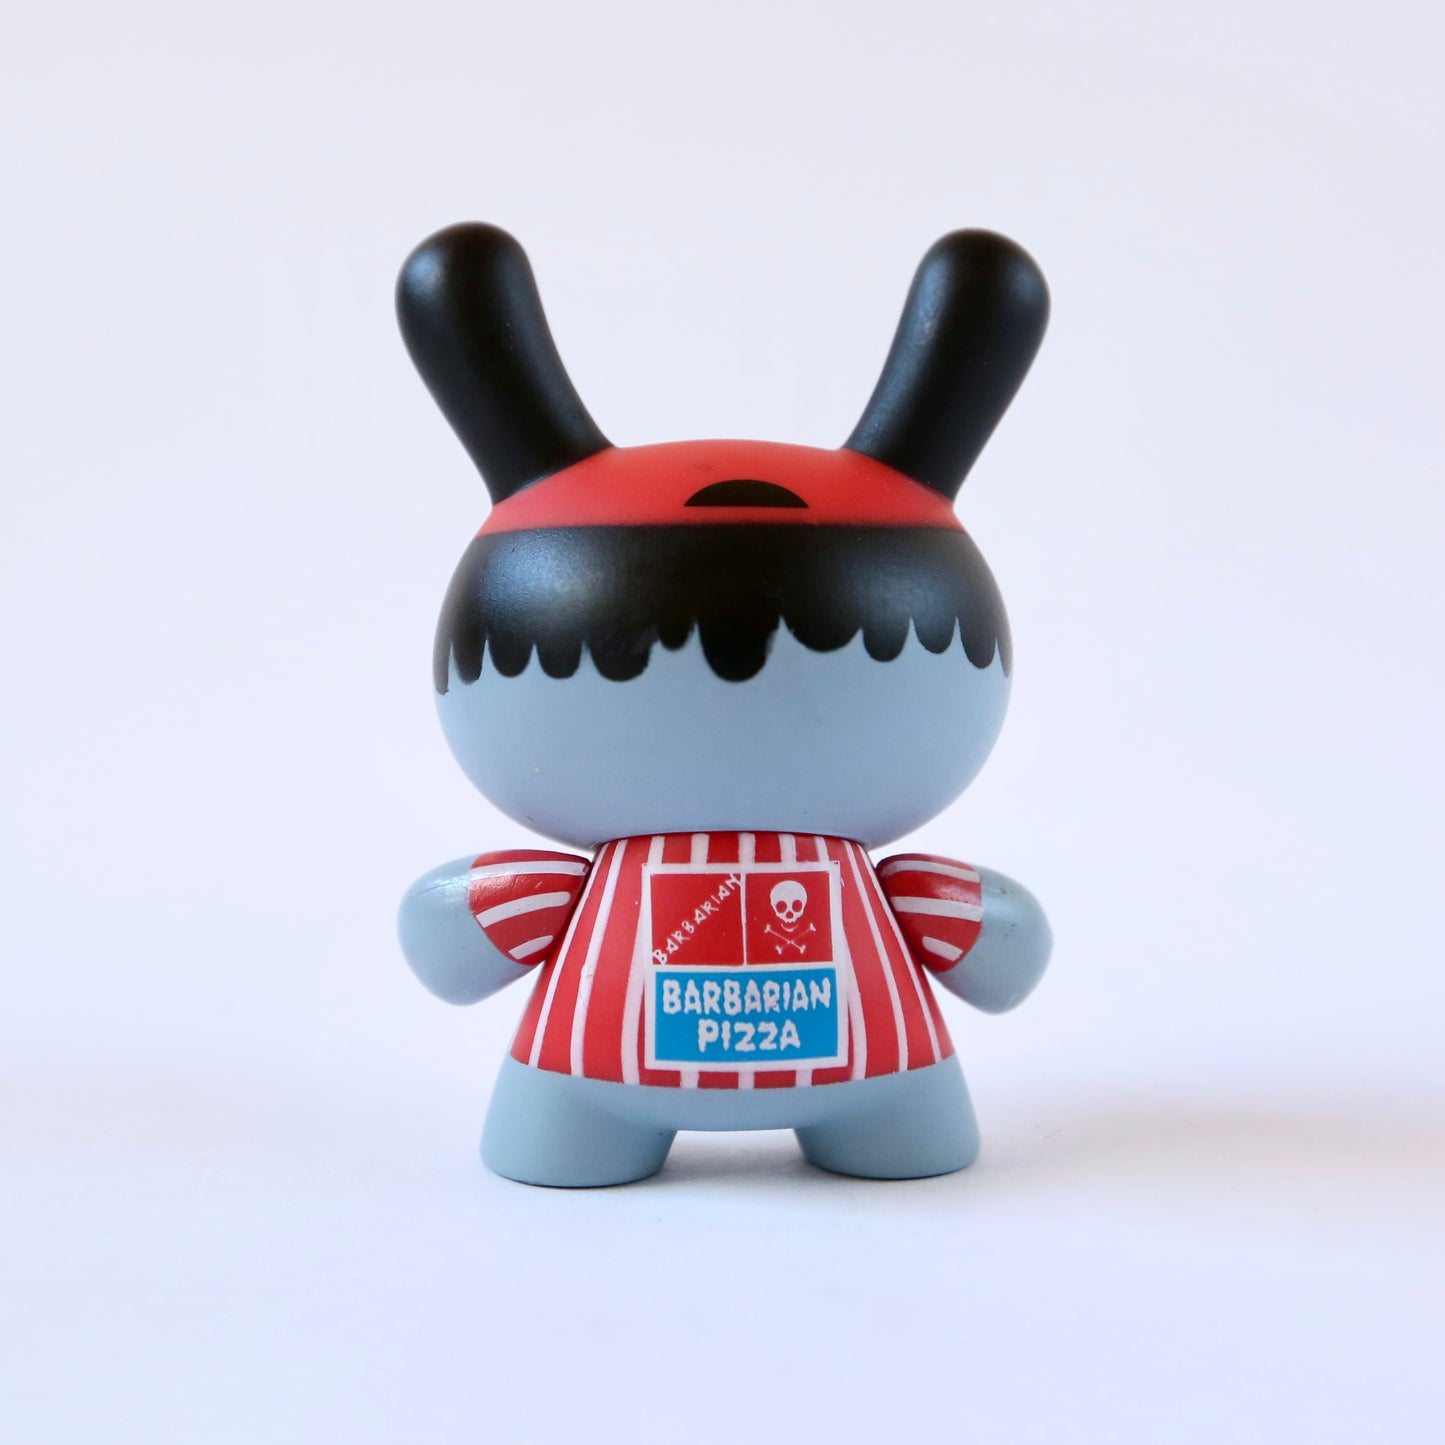 "Pizza Boy" (1/25) 3in Dunny by Mad Barbarians x Kidrobot